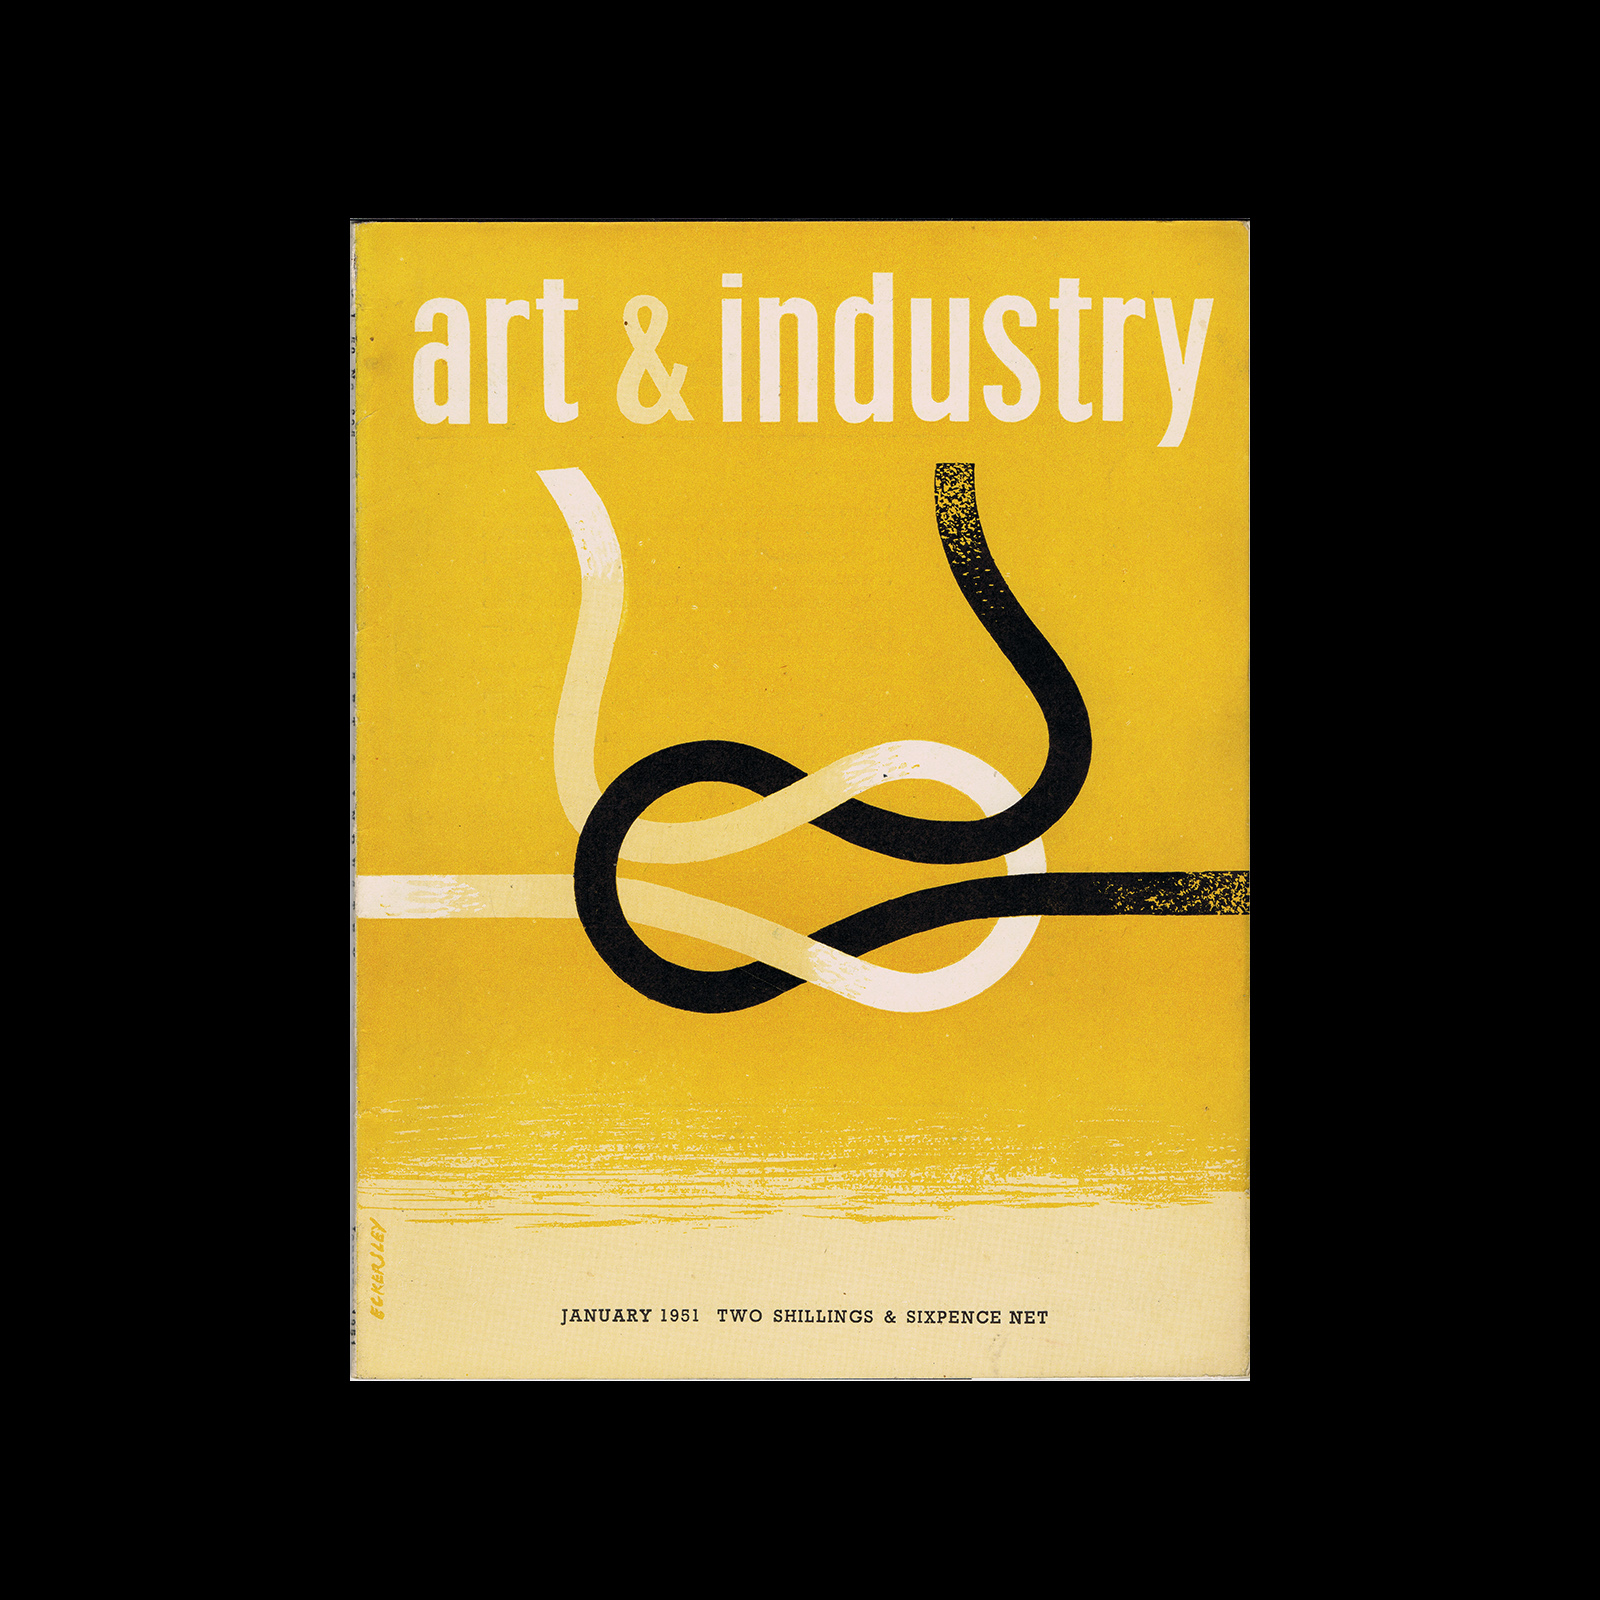 Art & Industry 295, January 1951. Cover design by Tom Eckersley